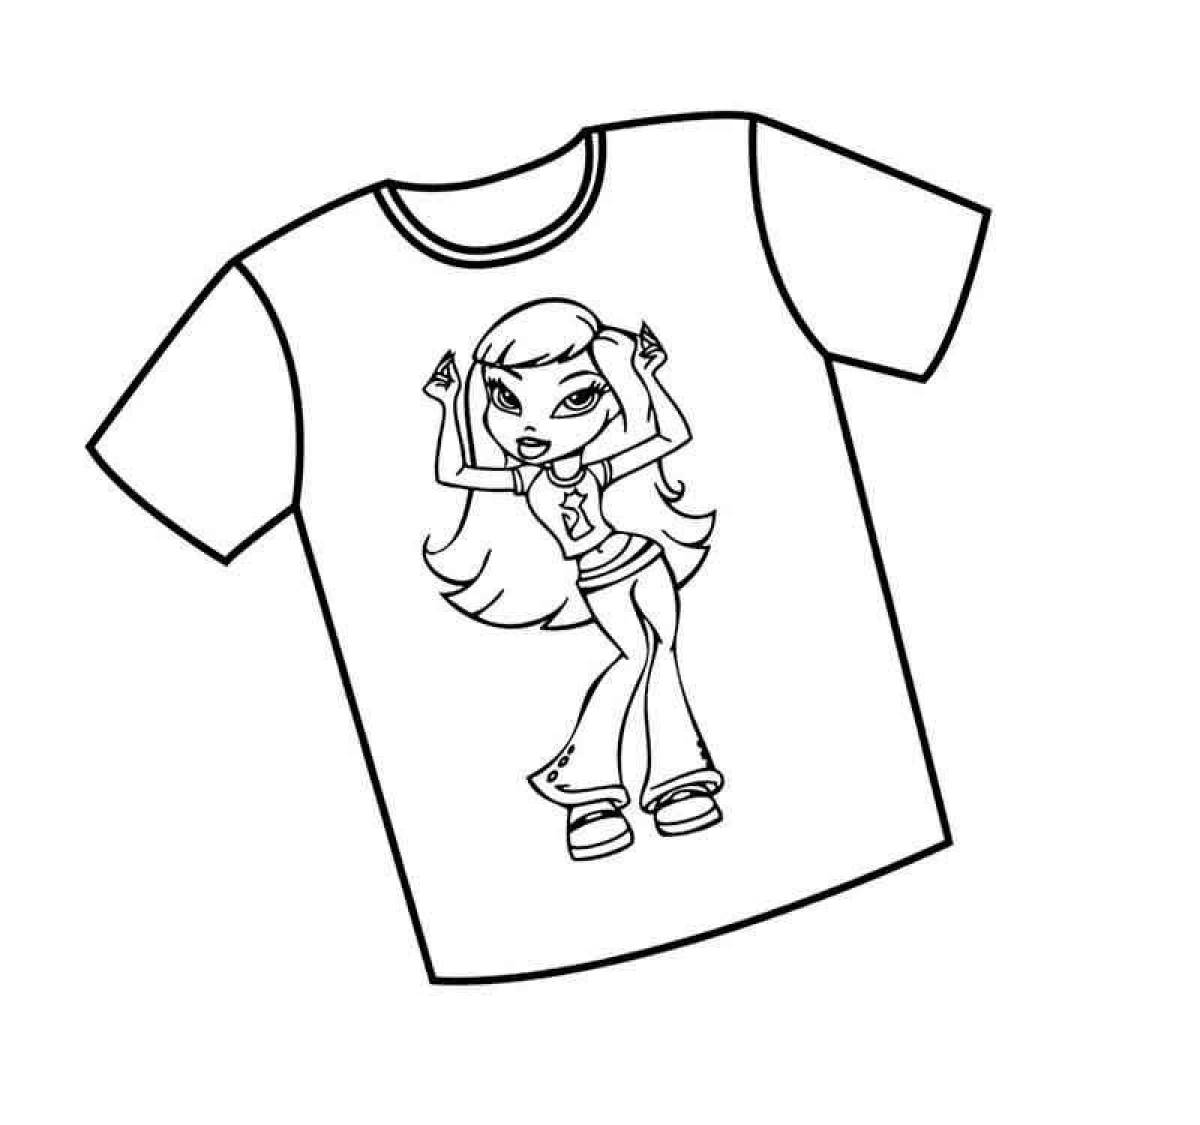 Colorful t-shirt coloring page for kids to explore